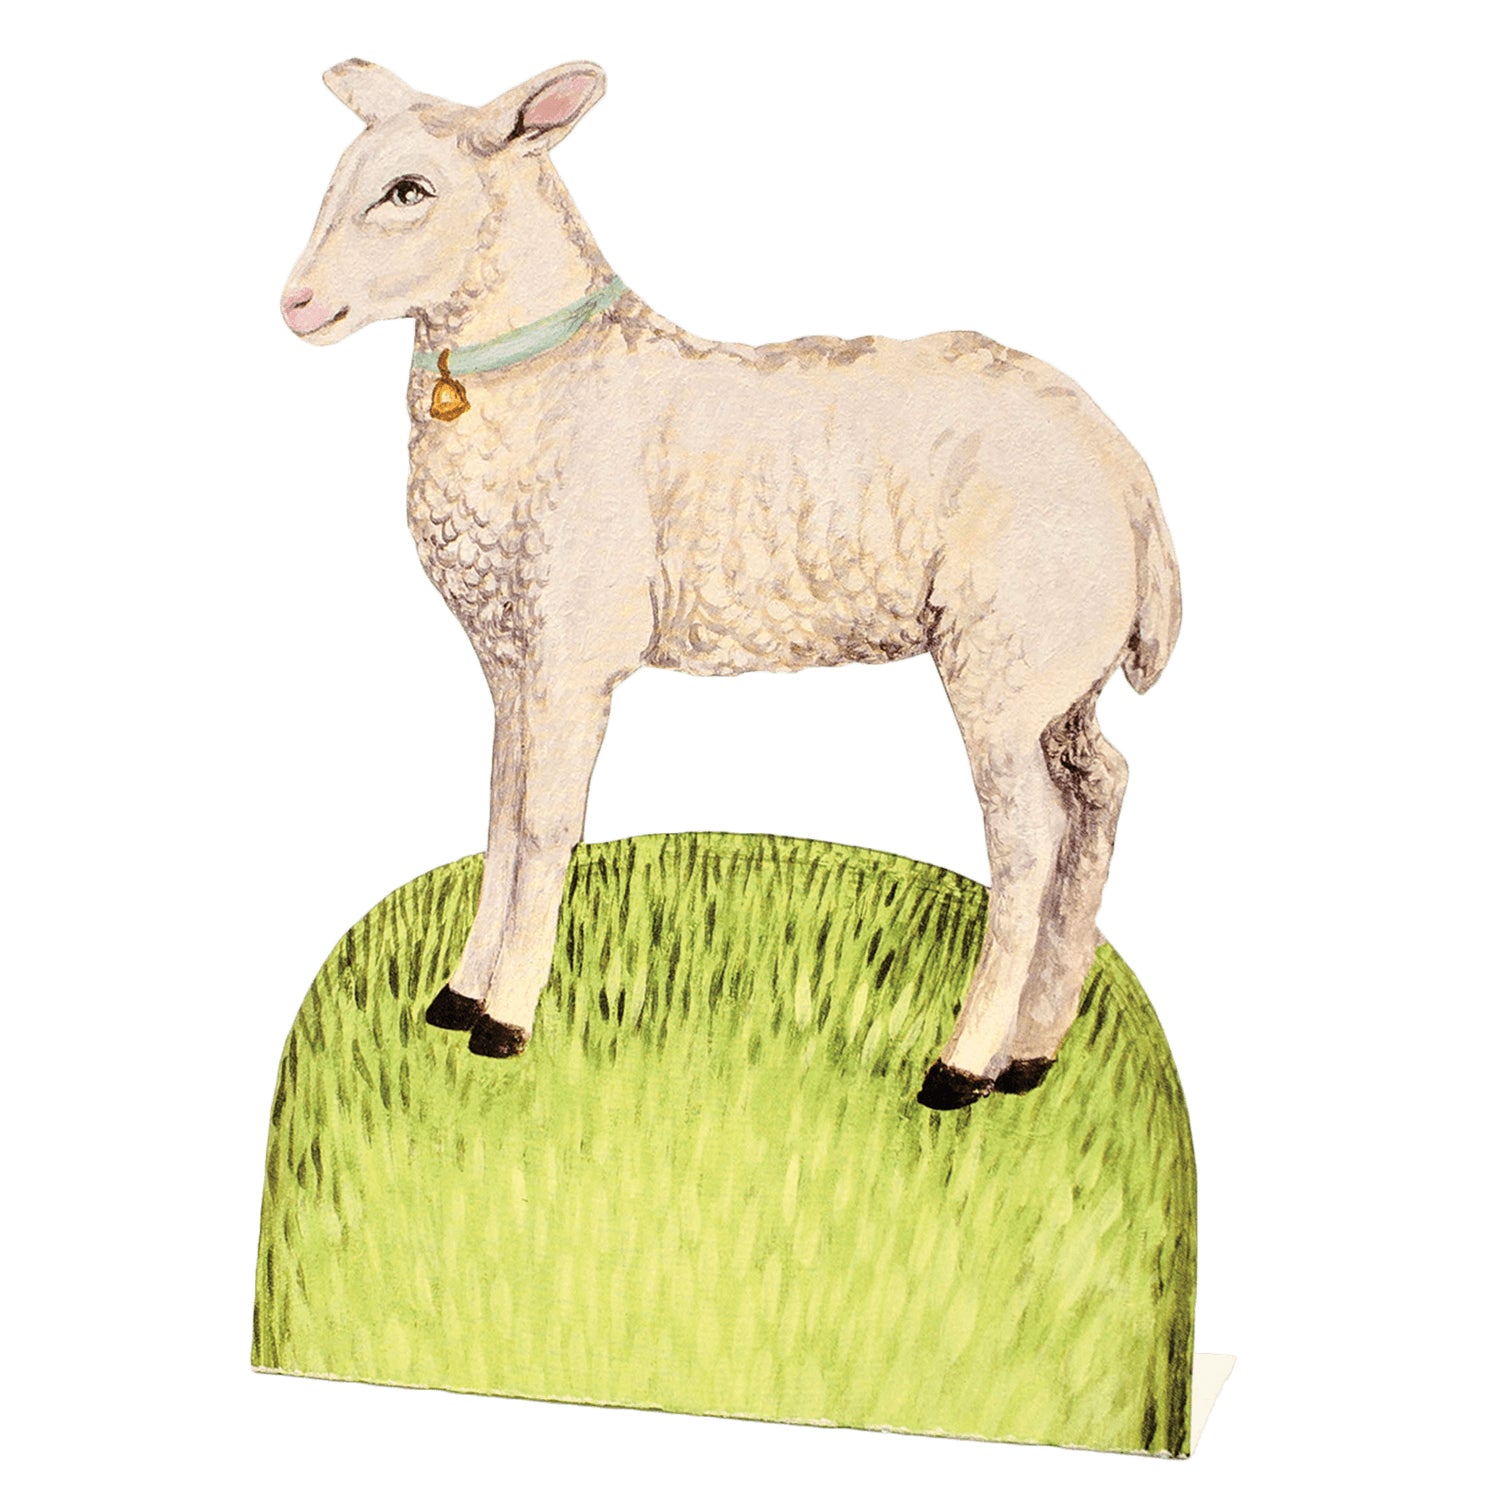 A Little Lamb Place Card by Hester &amp; Cook is standing on top of a grassy Easter Garden hill.